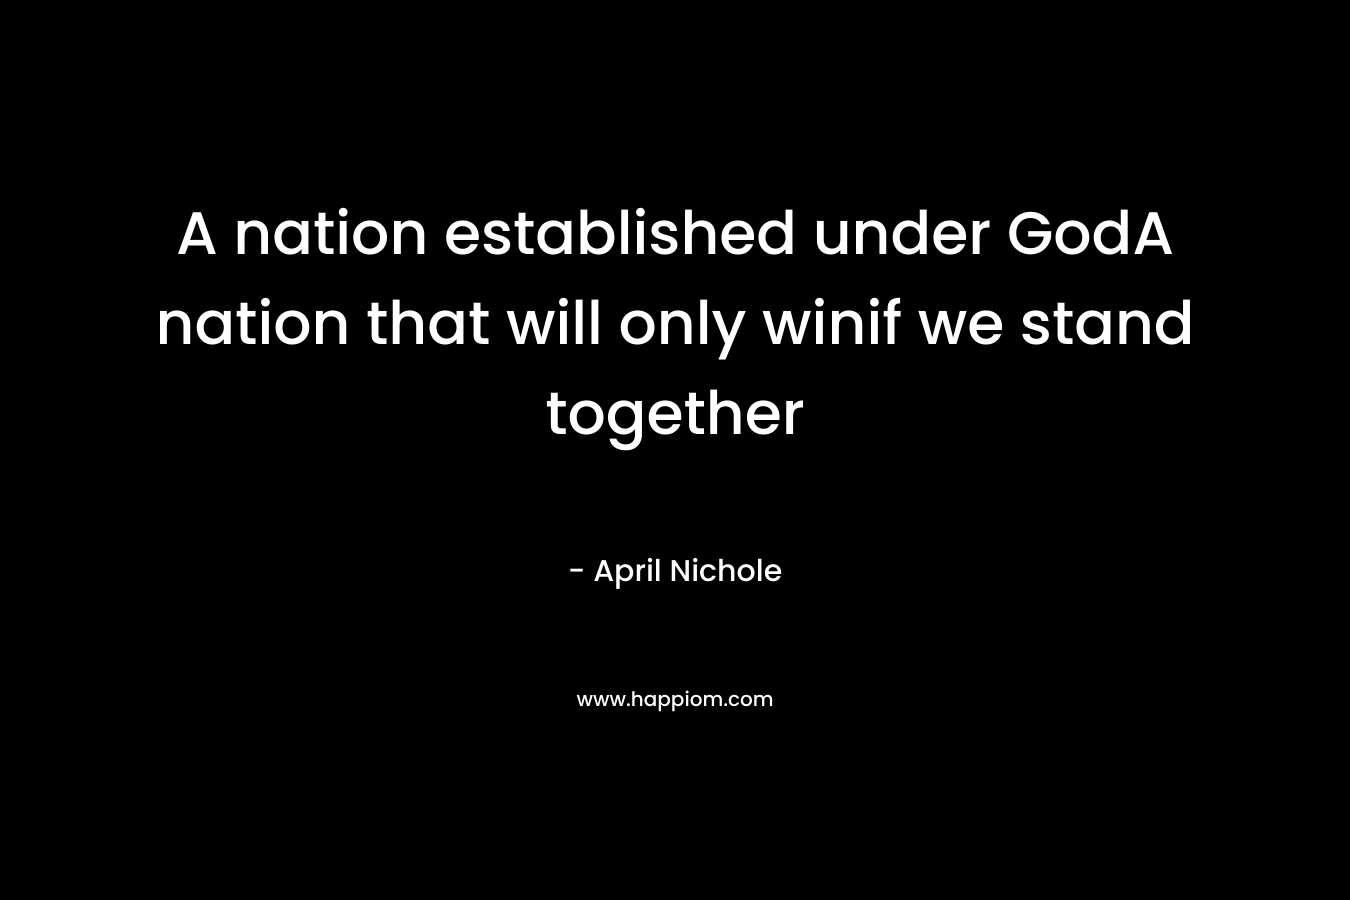 A nation established under GodA nation that will only winif we stand together – April Nichole